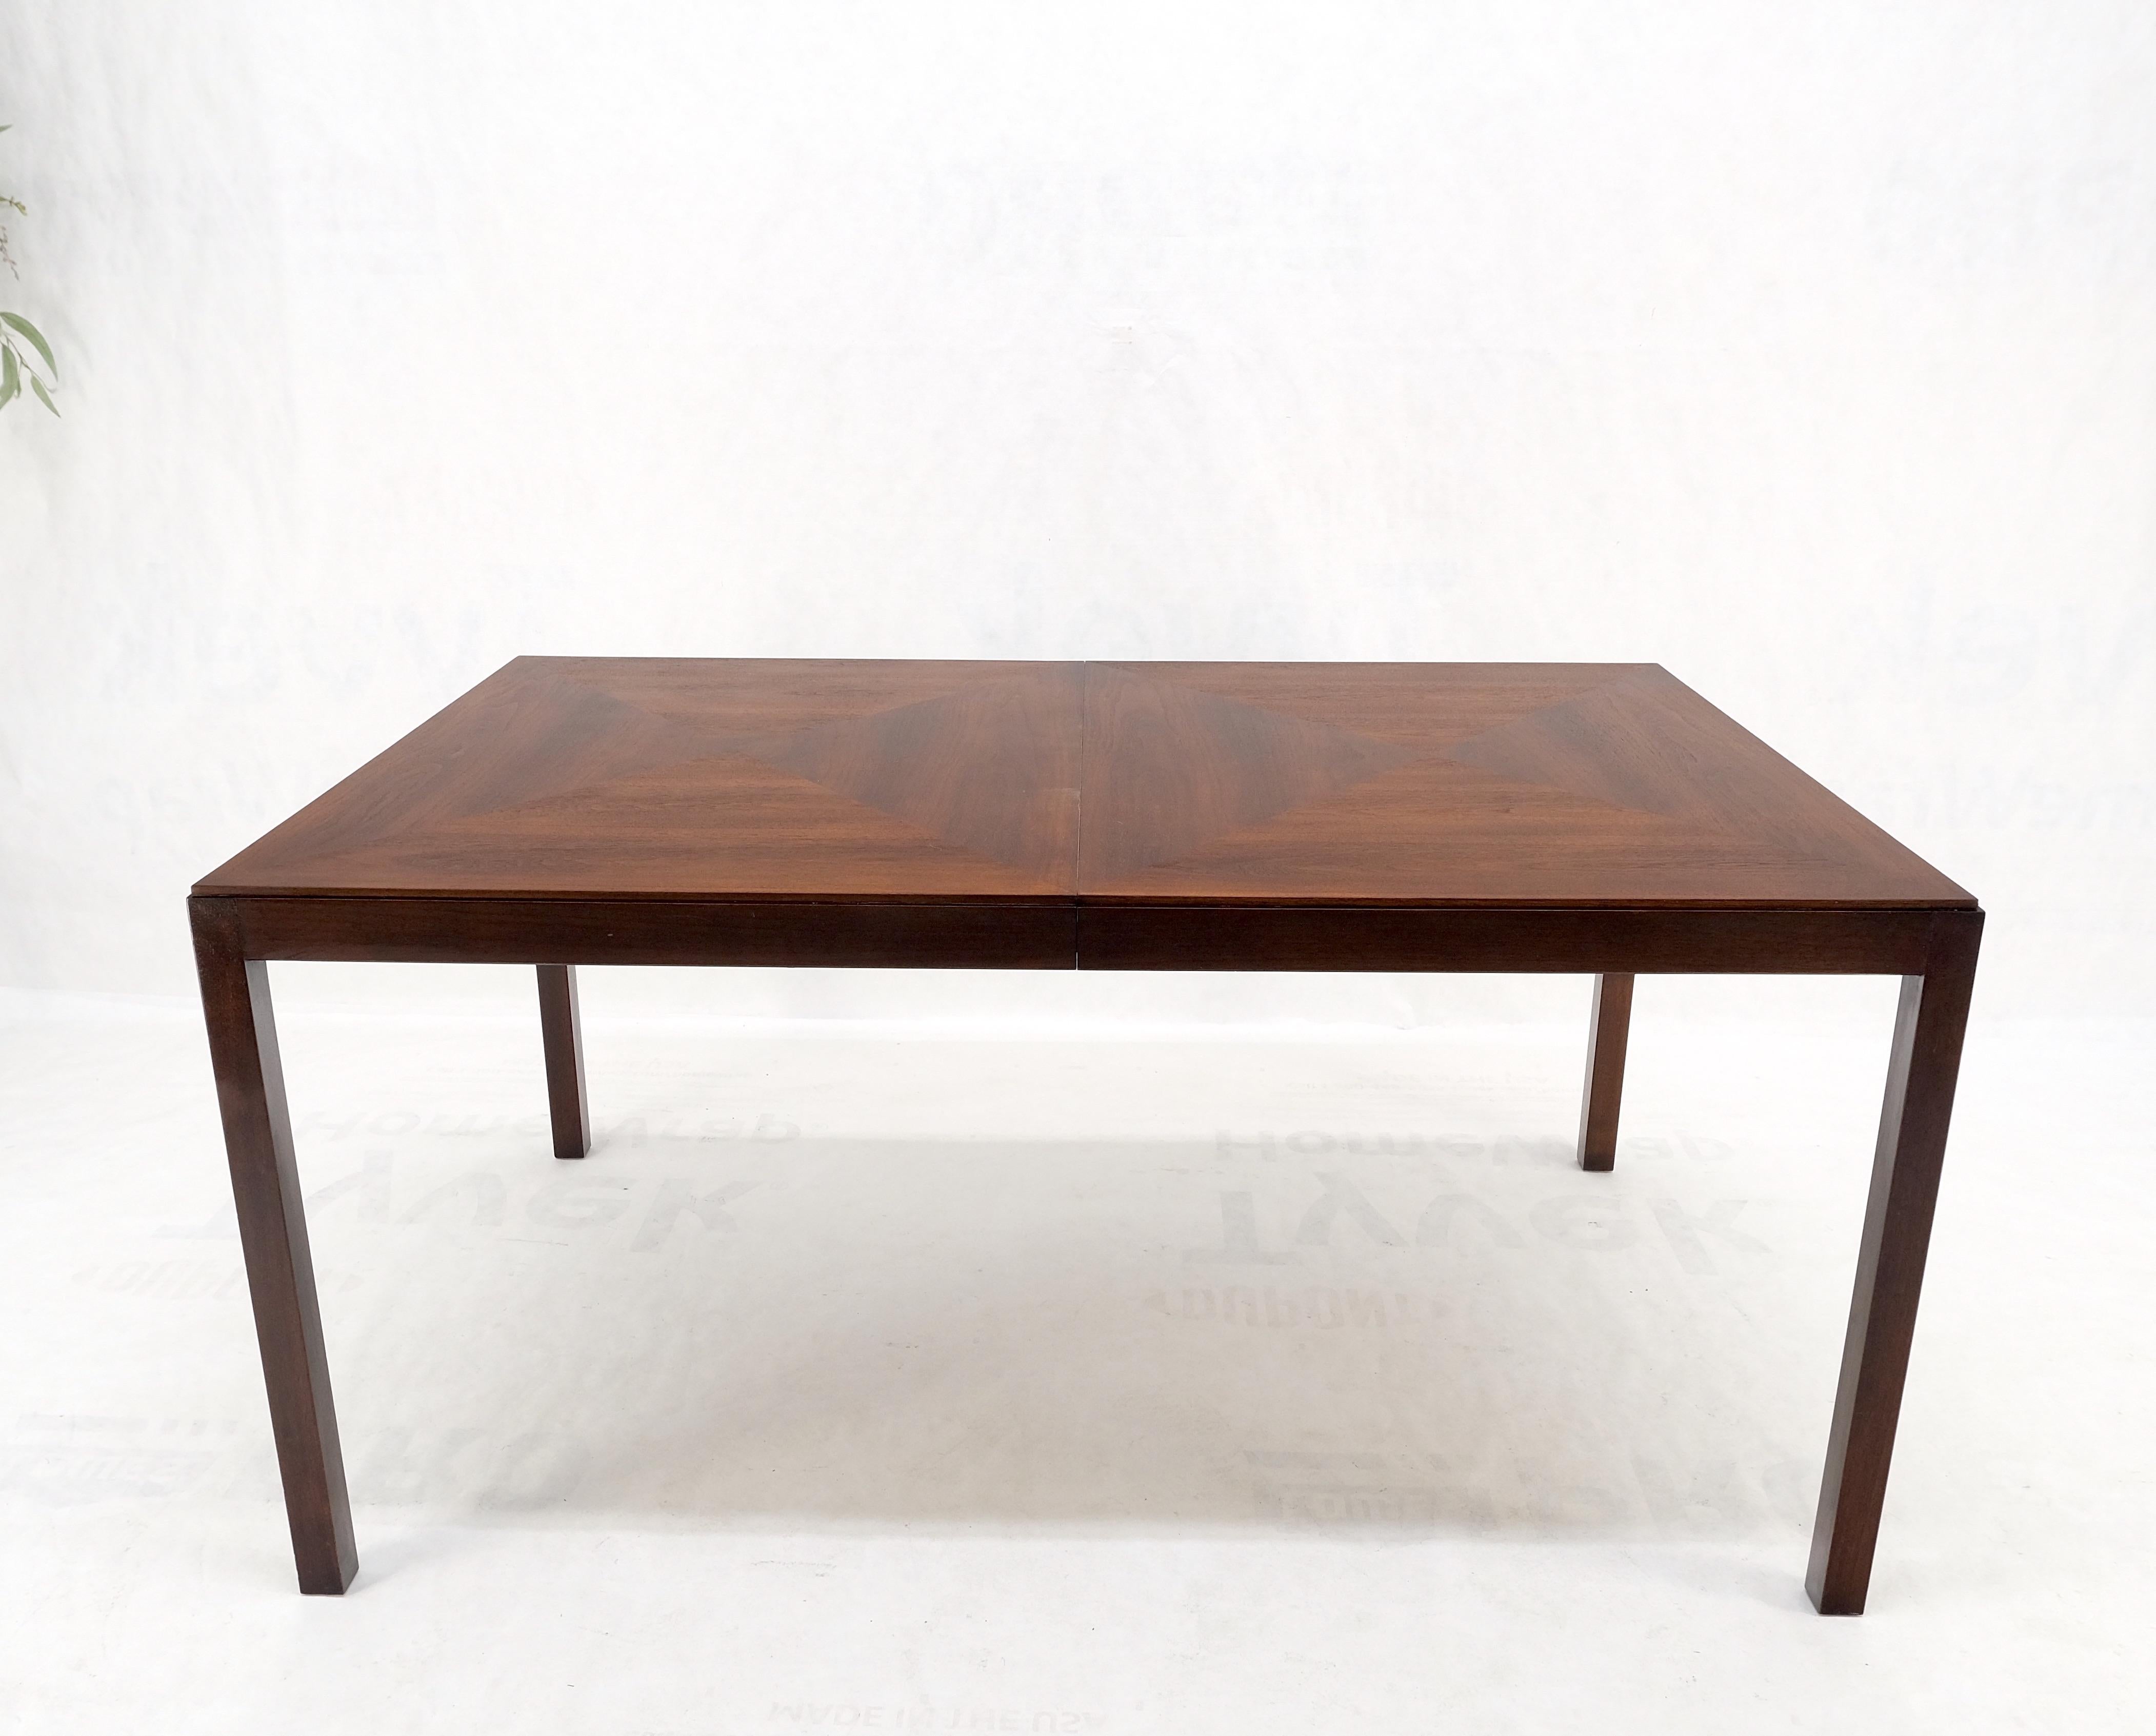 John Stuart two tone leaves Mid-Century Modern rectangle dining table MINT!
two leaves, each measuring 18 inches across, the table measures 98 inches total with leaves.